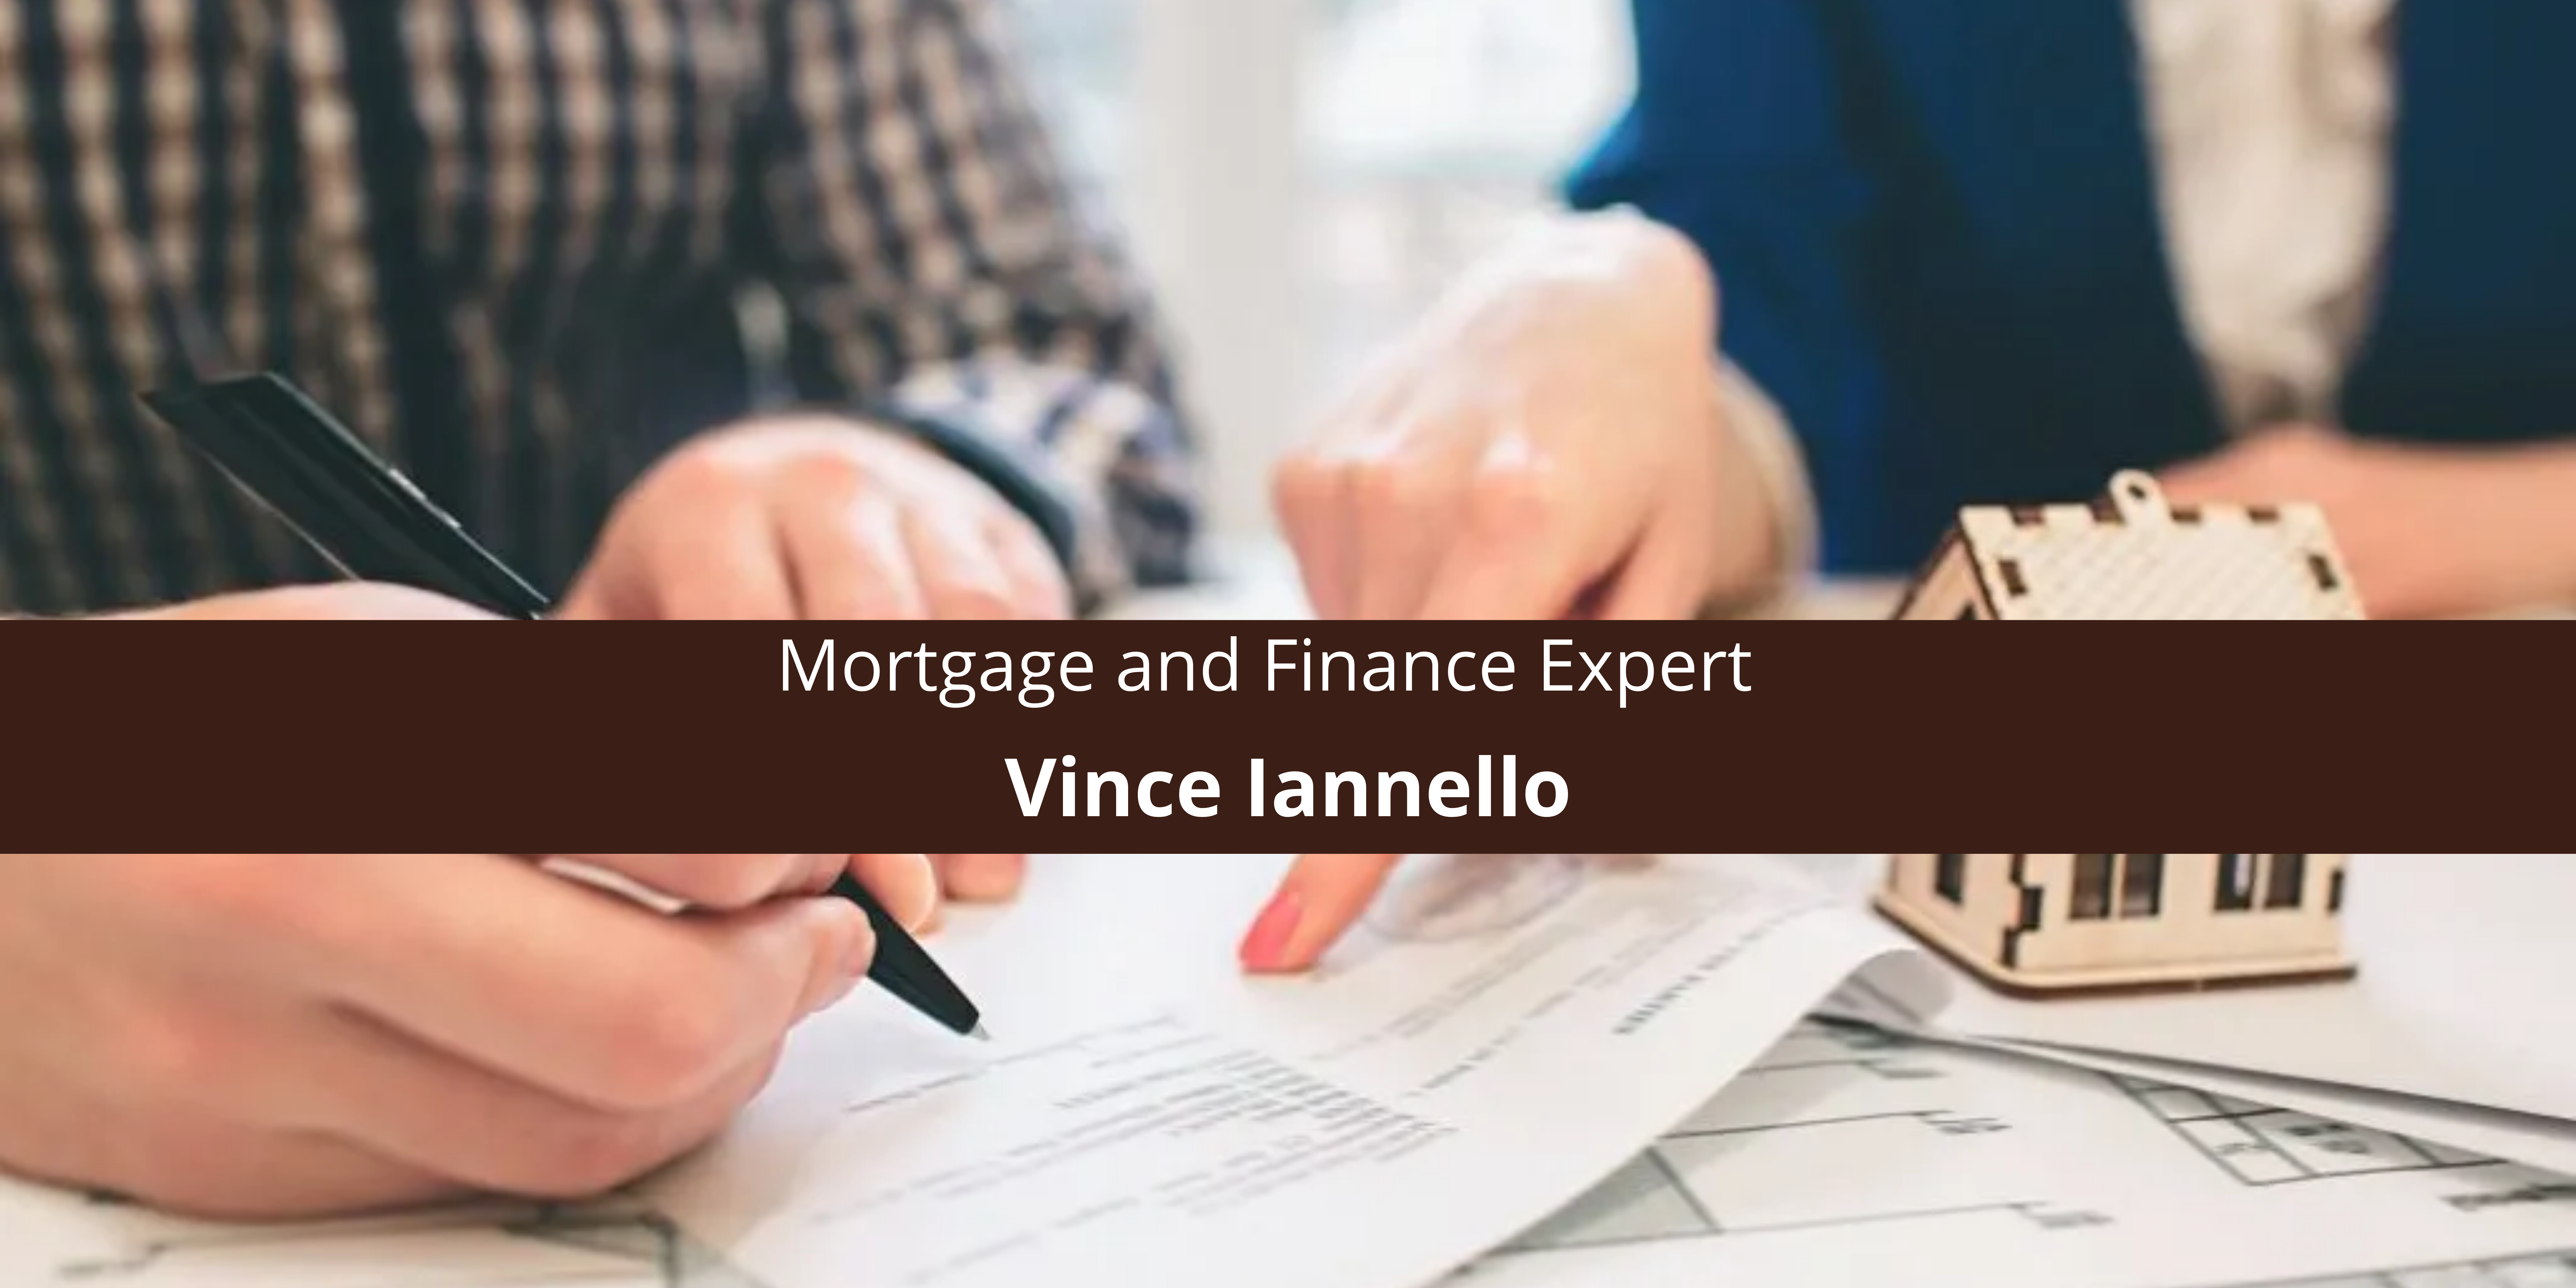 Vince Iannello: Mortgage and Finance Expert